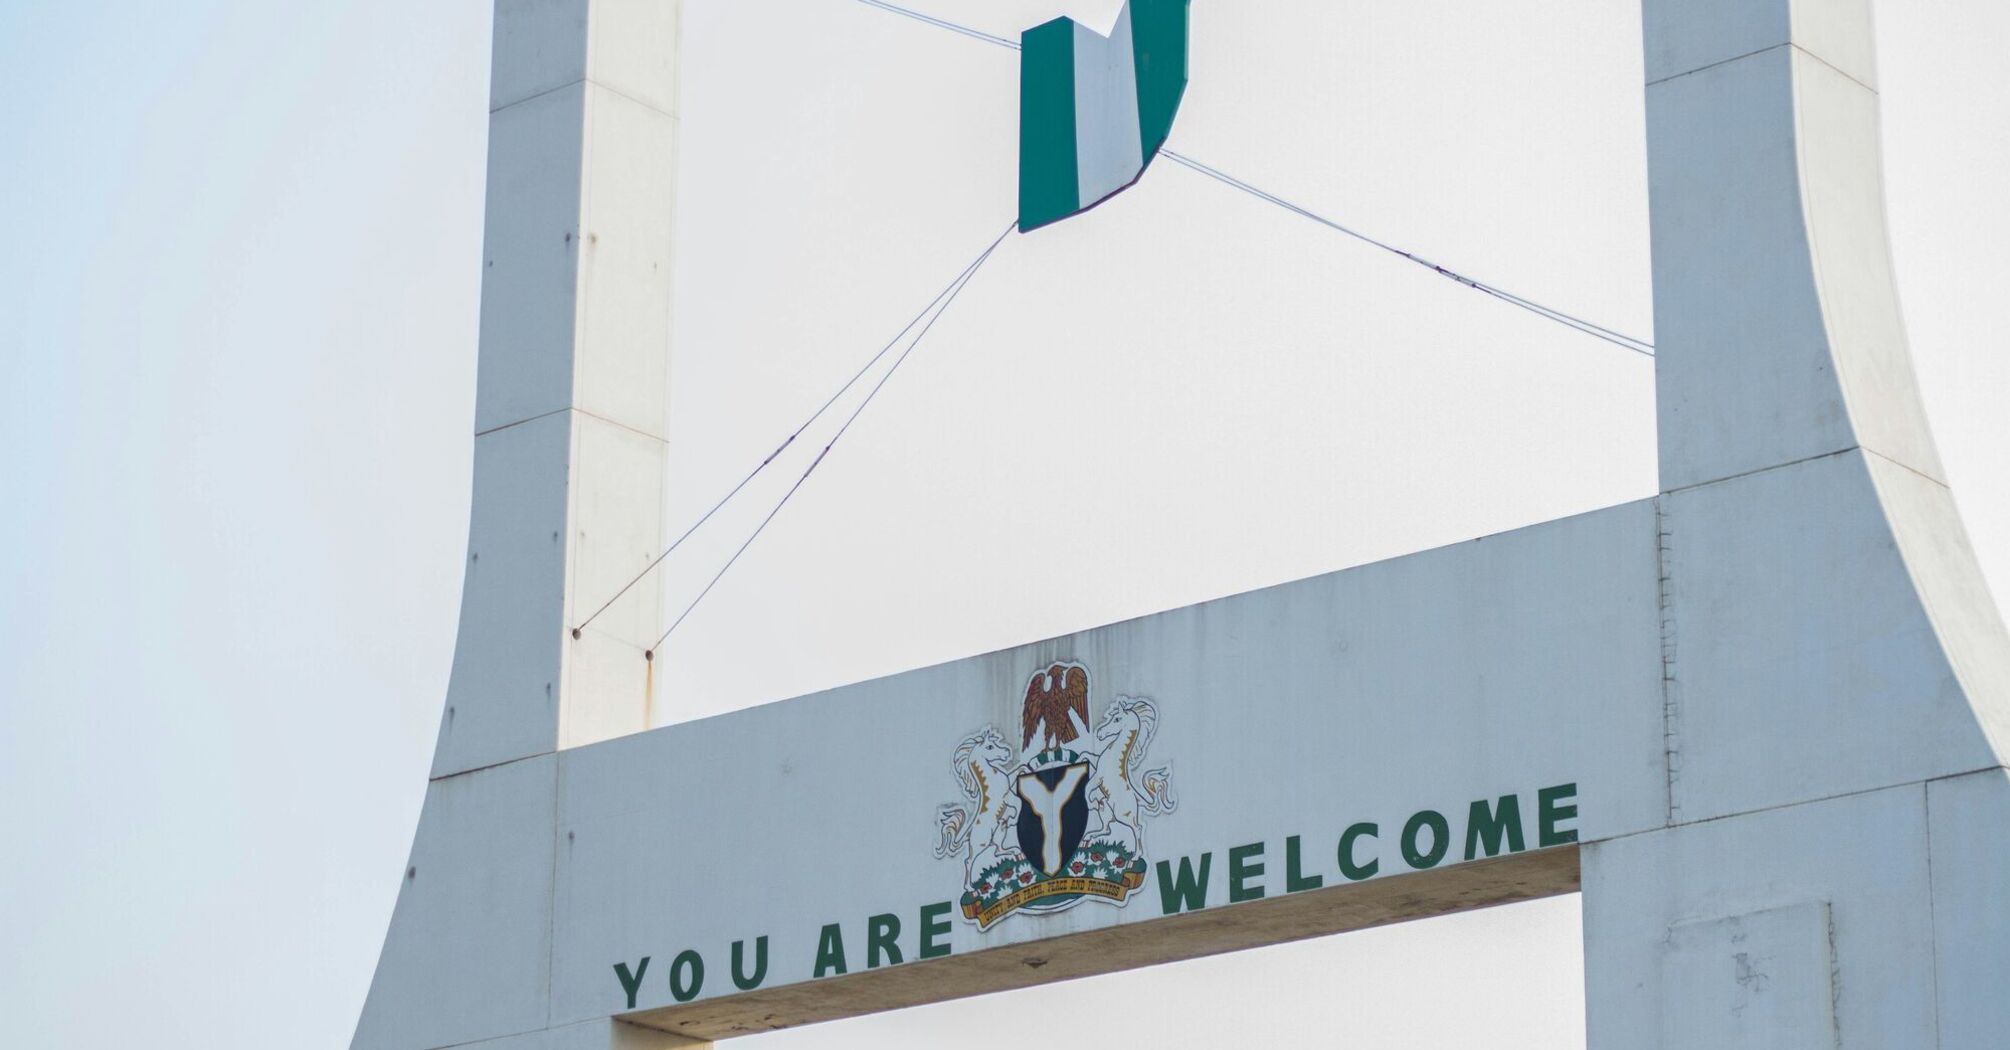 Welcome to Nigeria sign